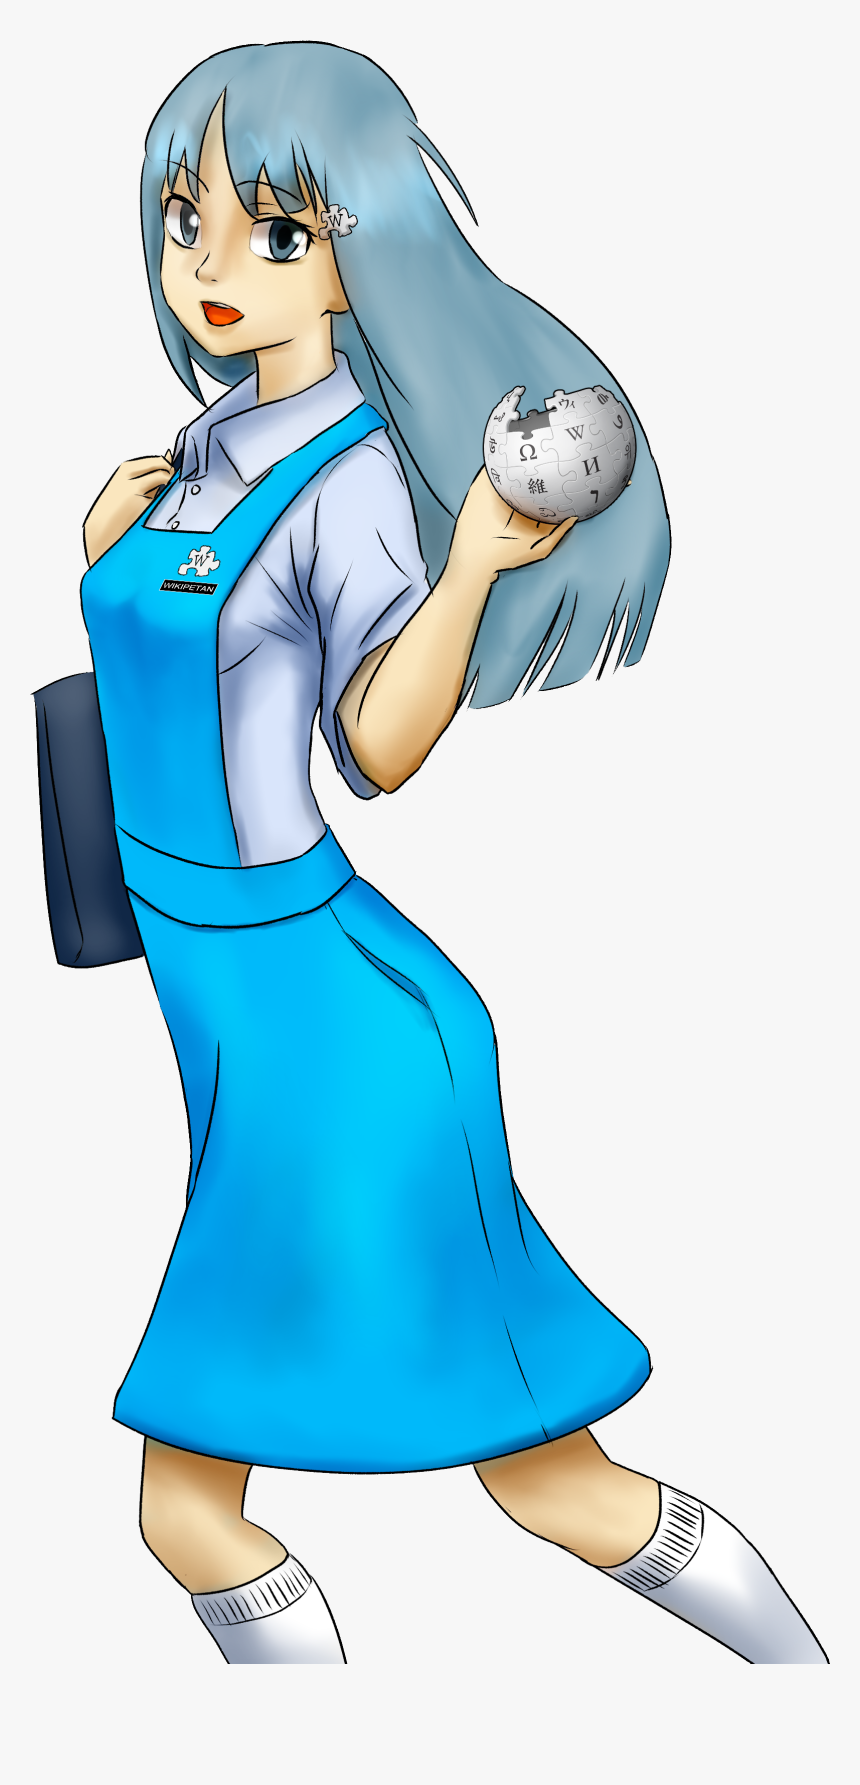 Wikipetan In Malaysian Highschool Clothes - Cartoon, HD Png Download, Free Download